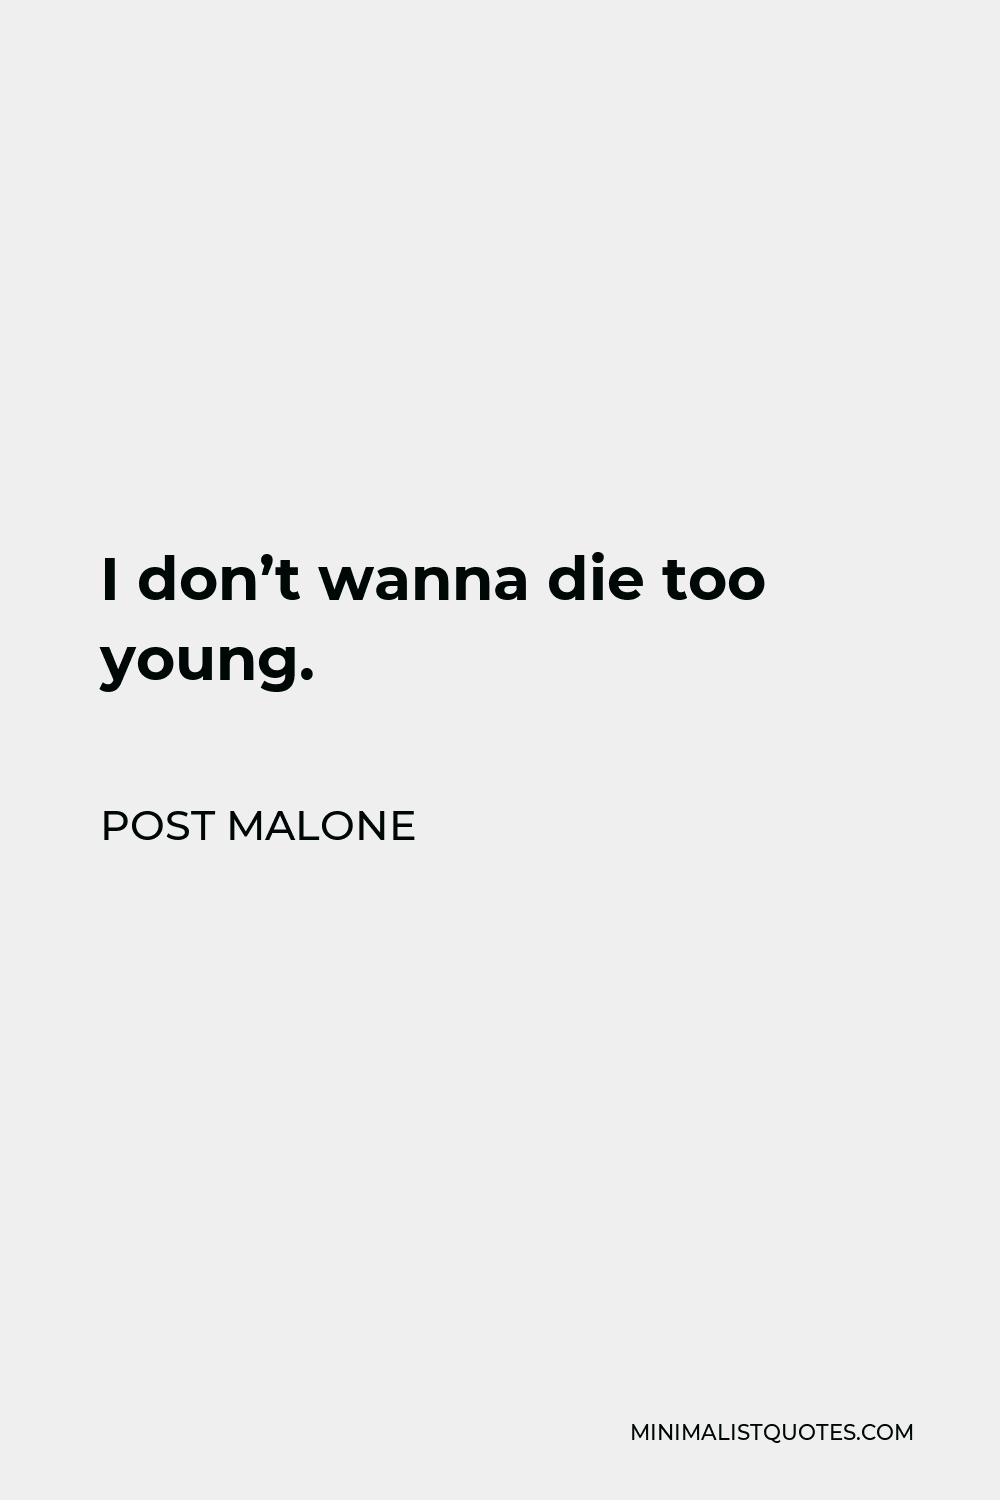 Post Malone Quote - I don’t wanna die too young.